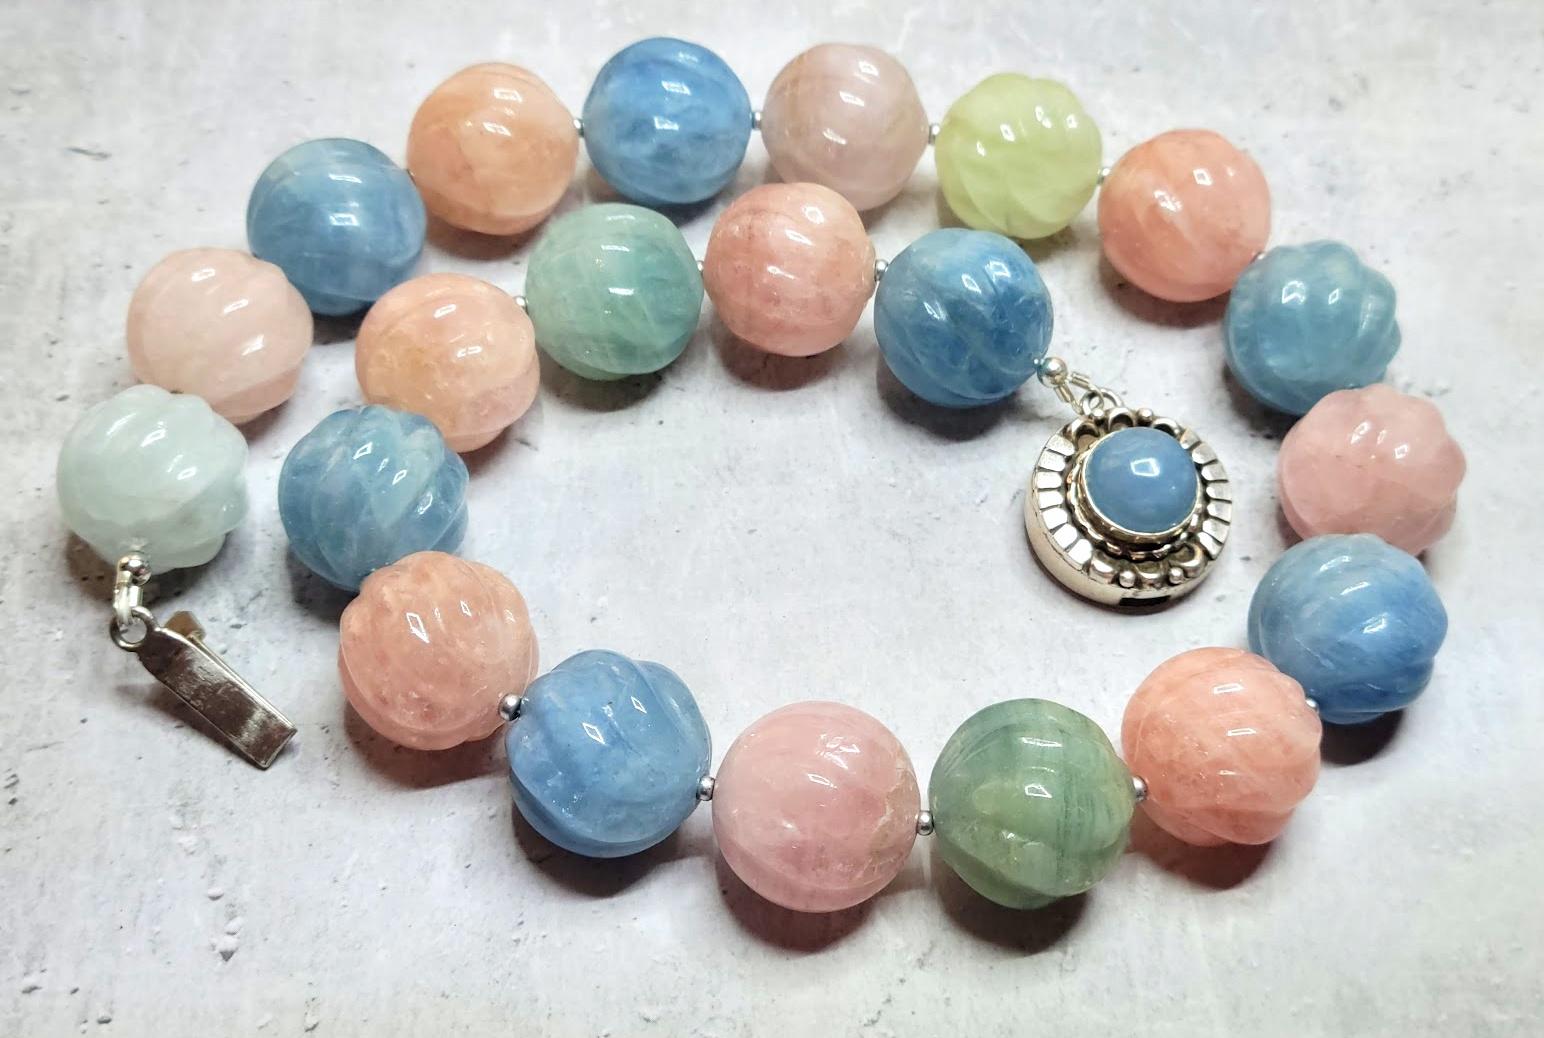 The length of the necklace is 18.5 inches (47 cm). The massive size of the rare carved beads is 18 mm.
The color of the beads is a soft shade of light green, light blue, pale peachy pink, and pale orange. Very gentle, soft pastel colors! Huge